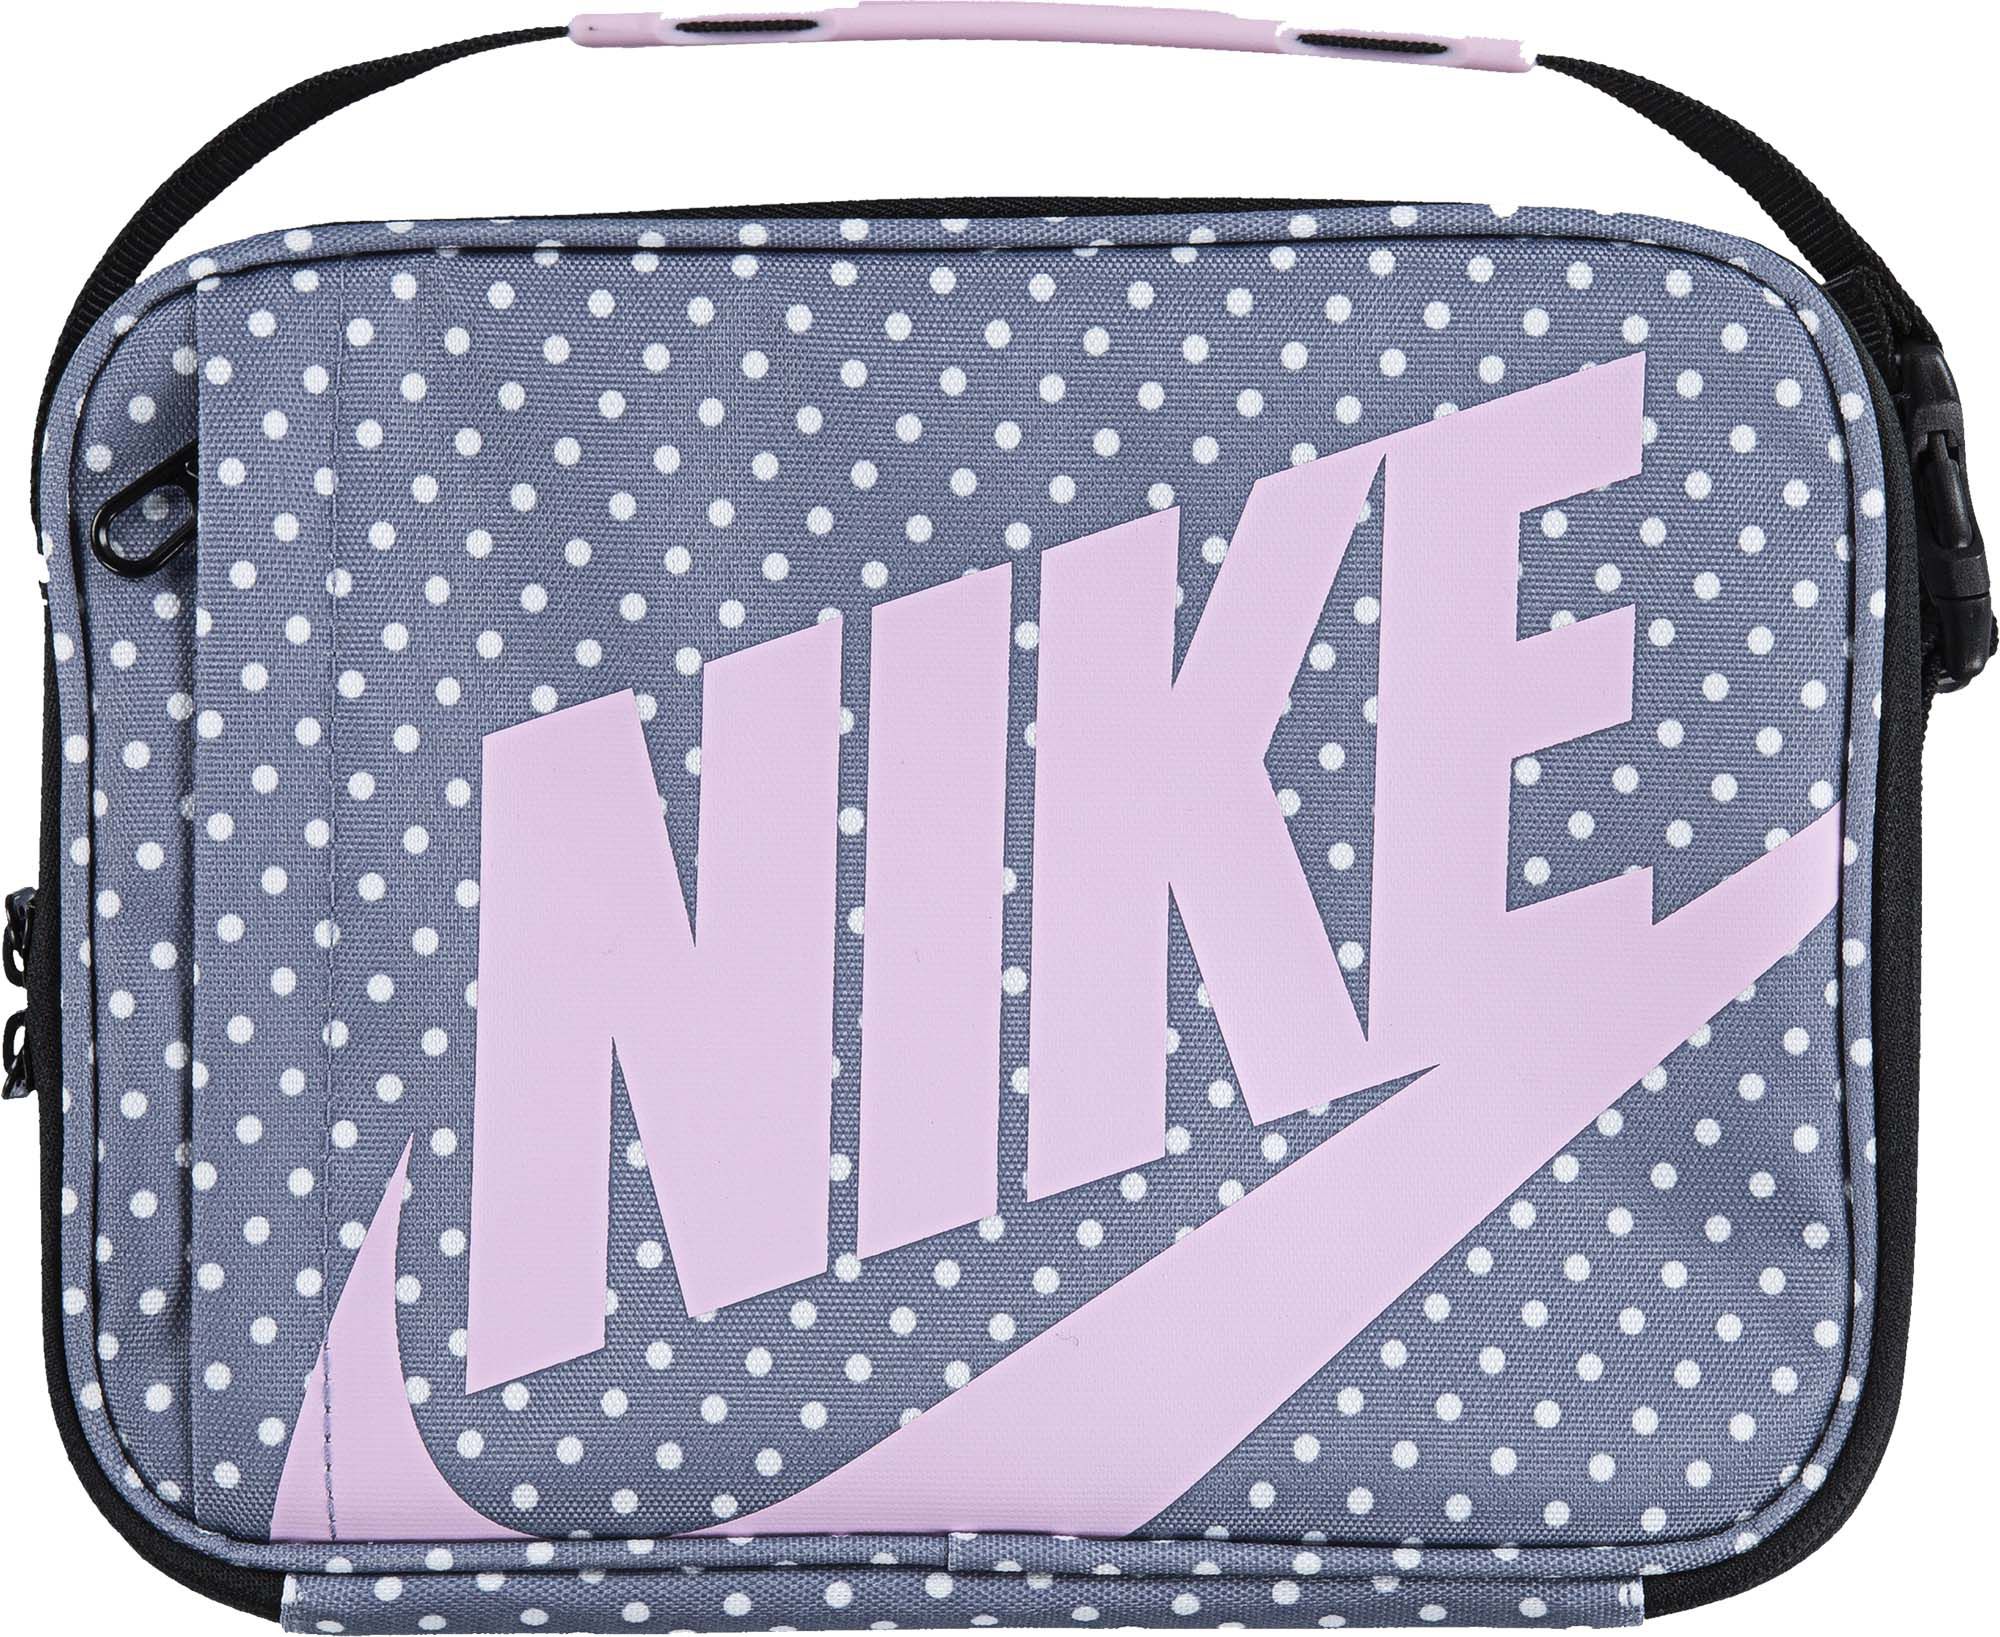 nike backpacks and lunchboxes